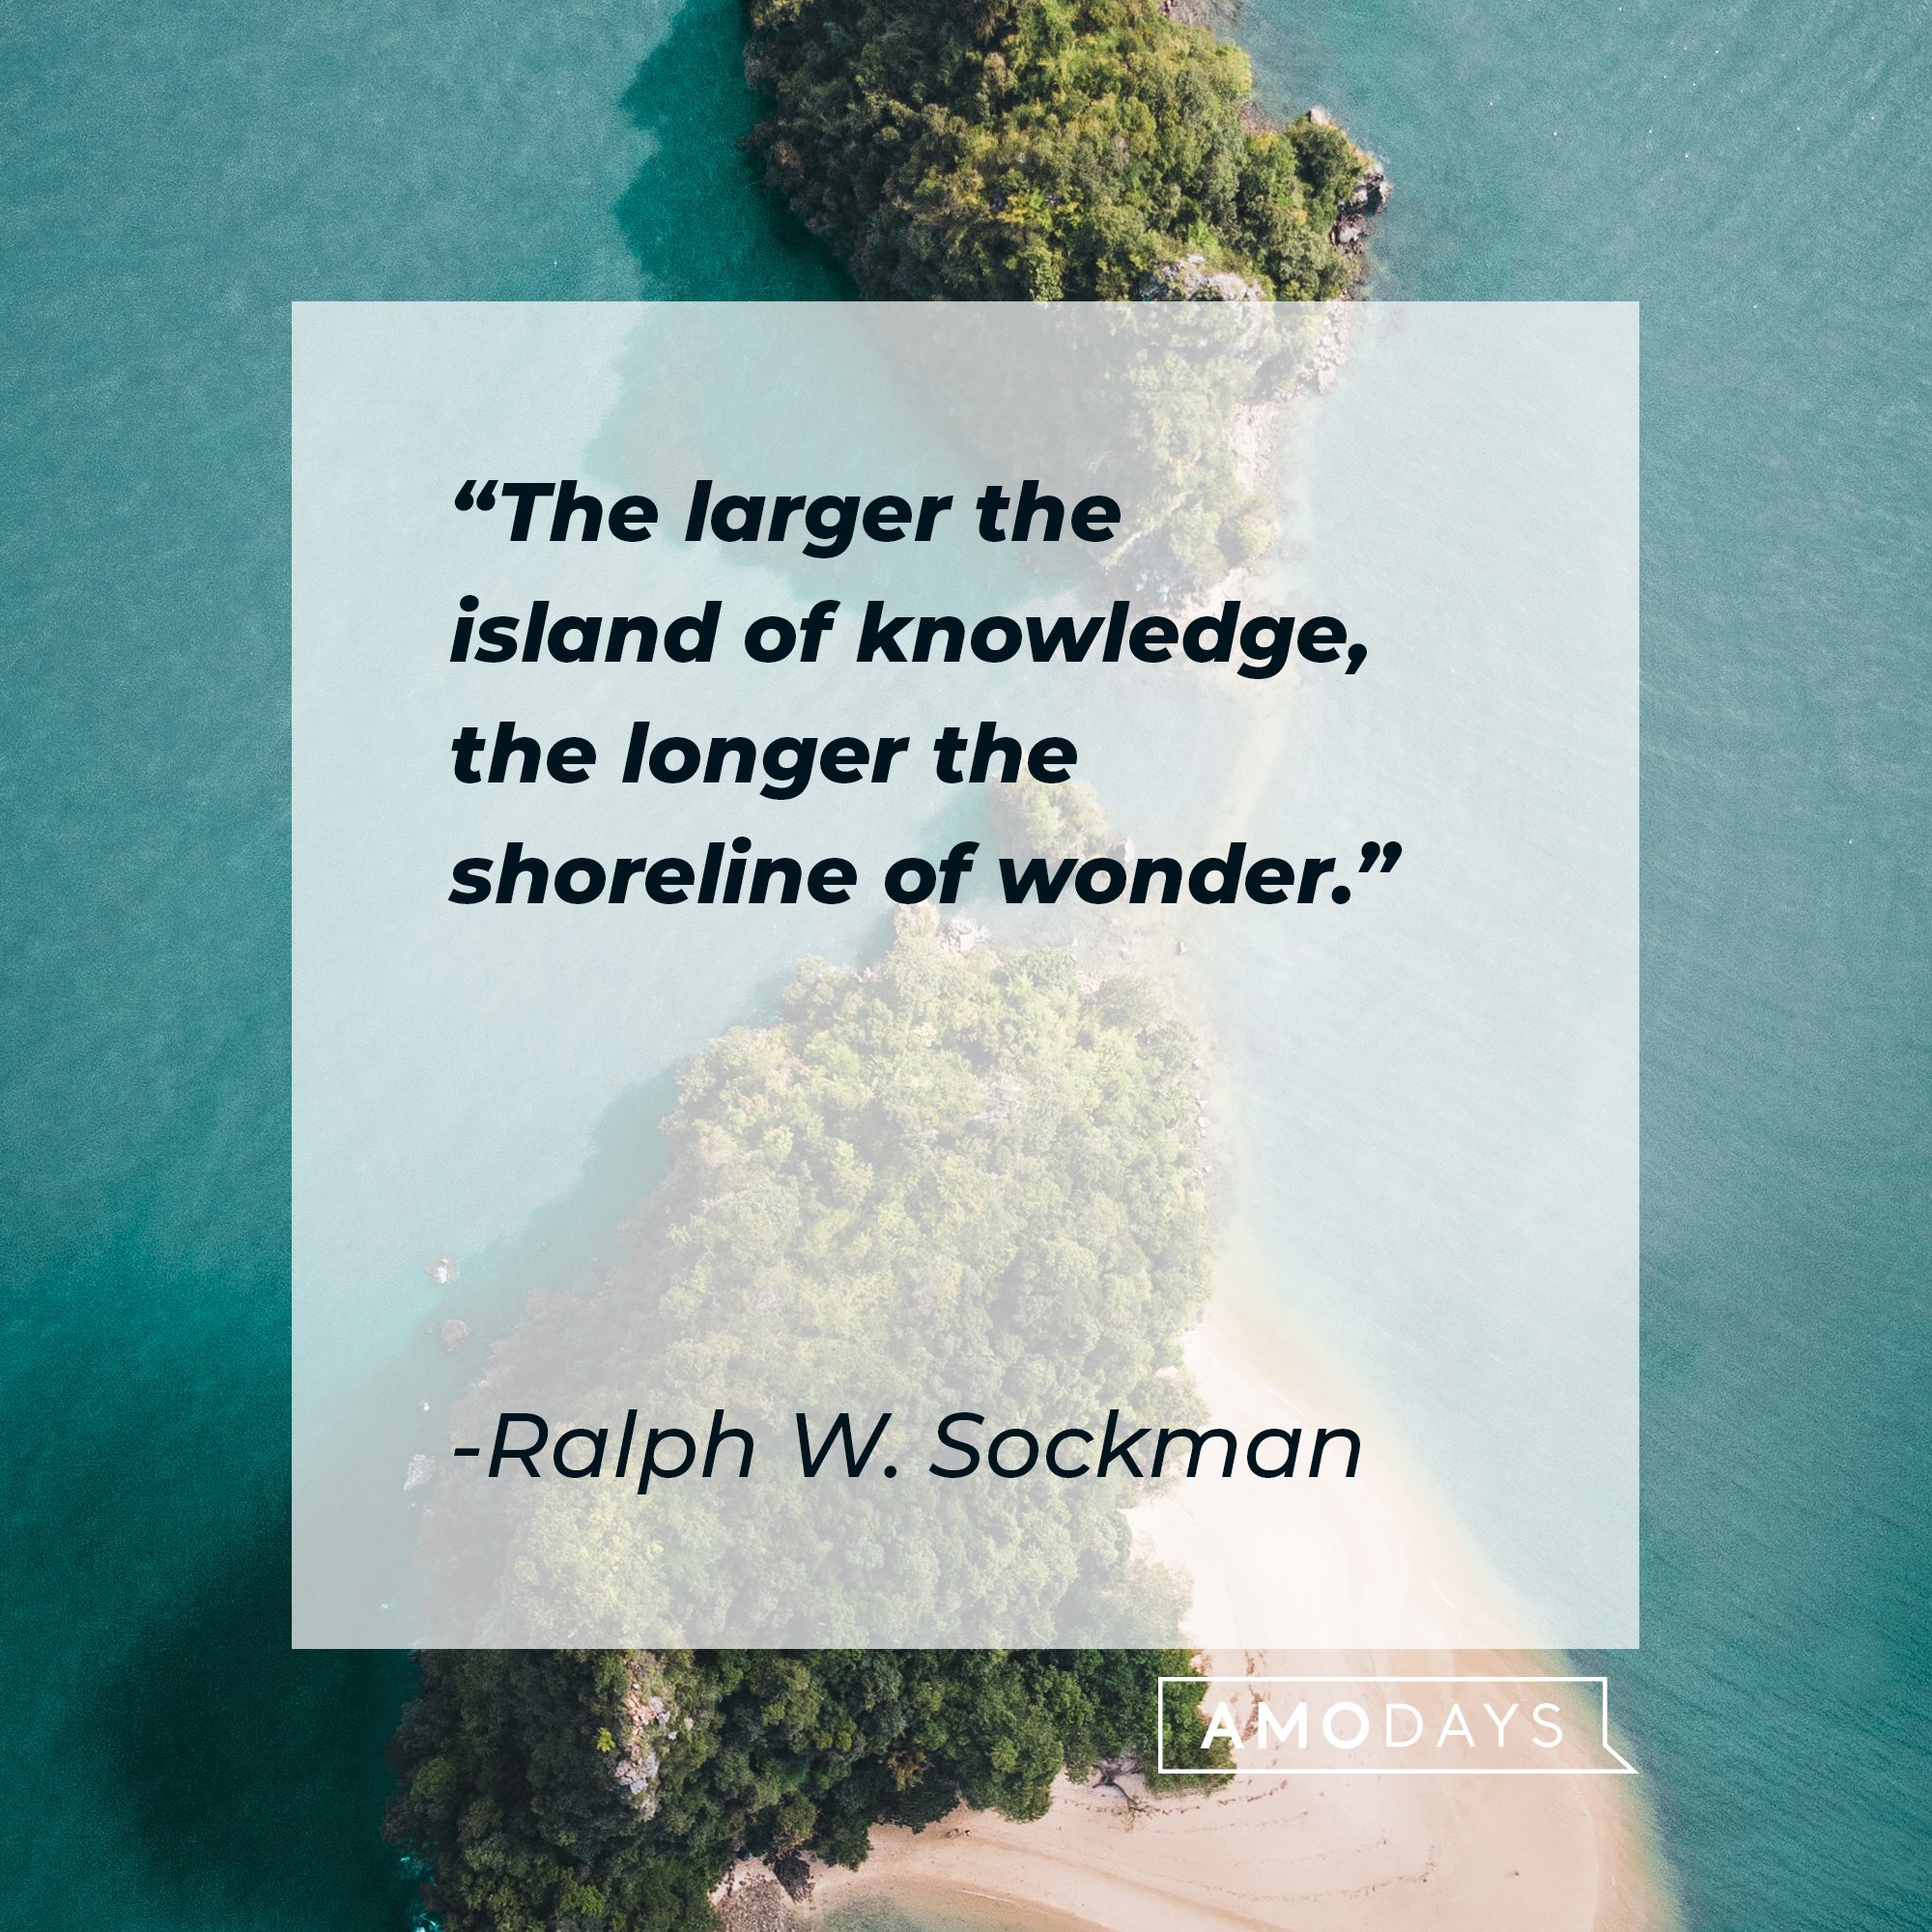 Ralph W. Sockman's quote: "The larger the island of knowledge, the longer the shoreline of wonder." |  Image: AmoDays